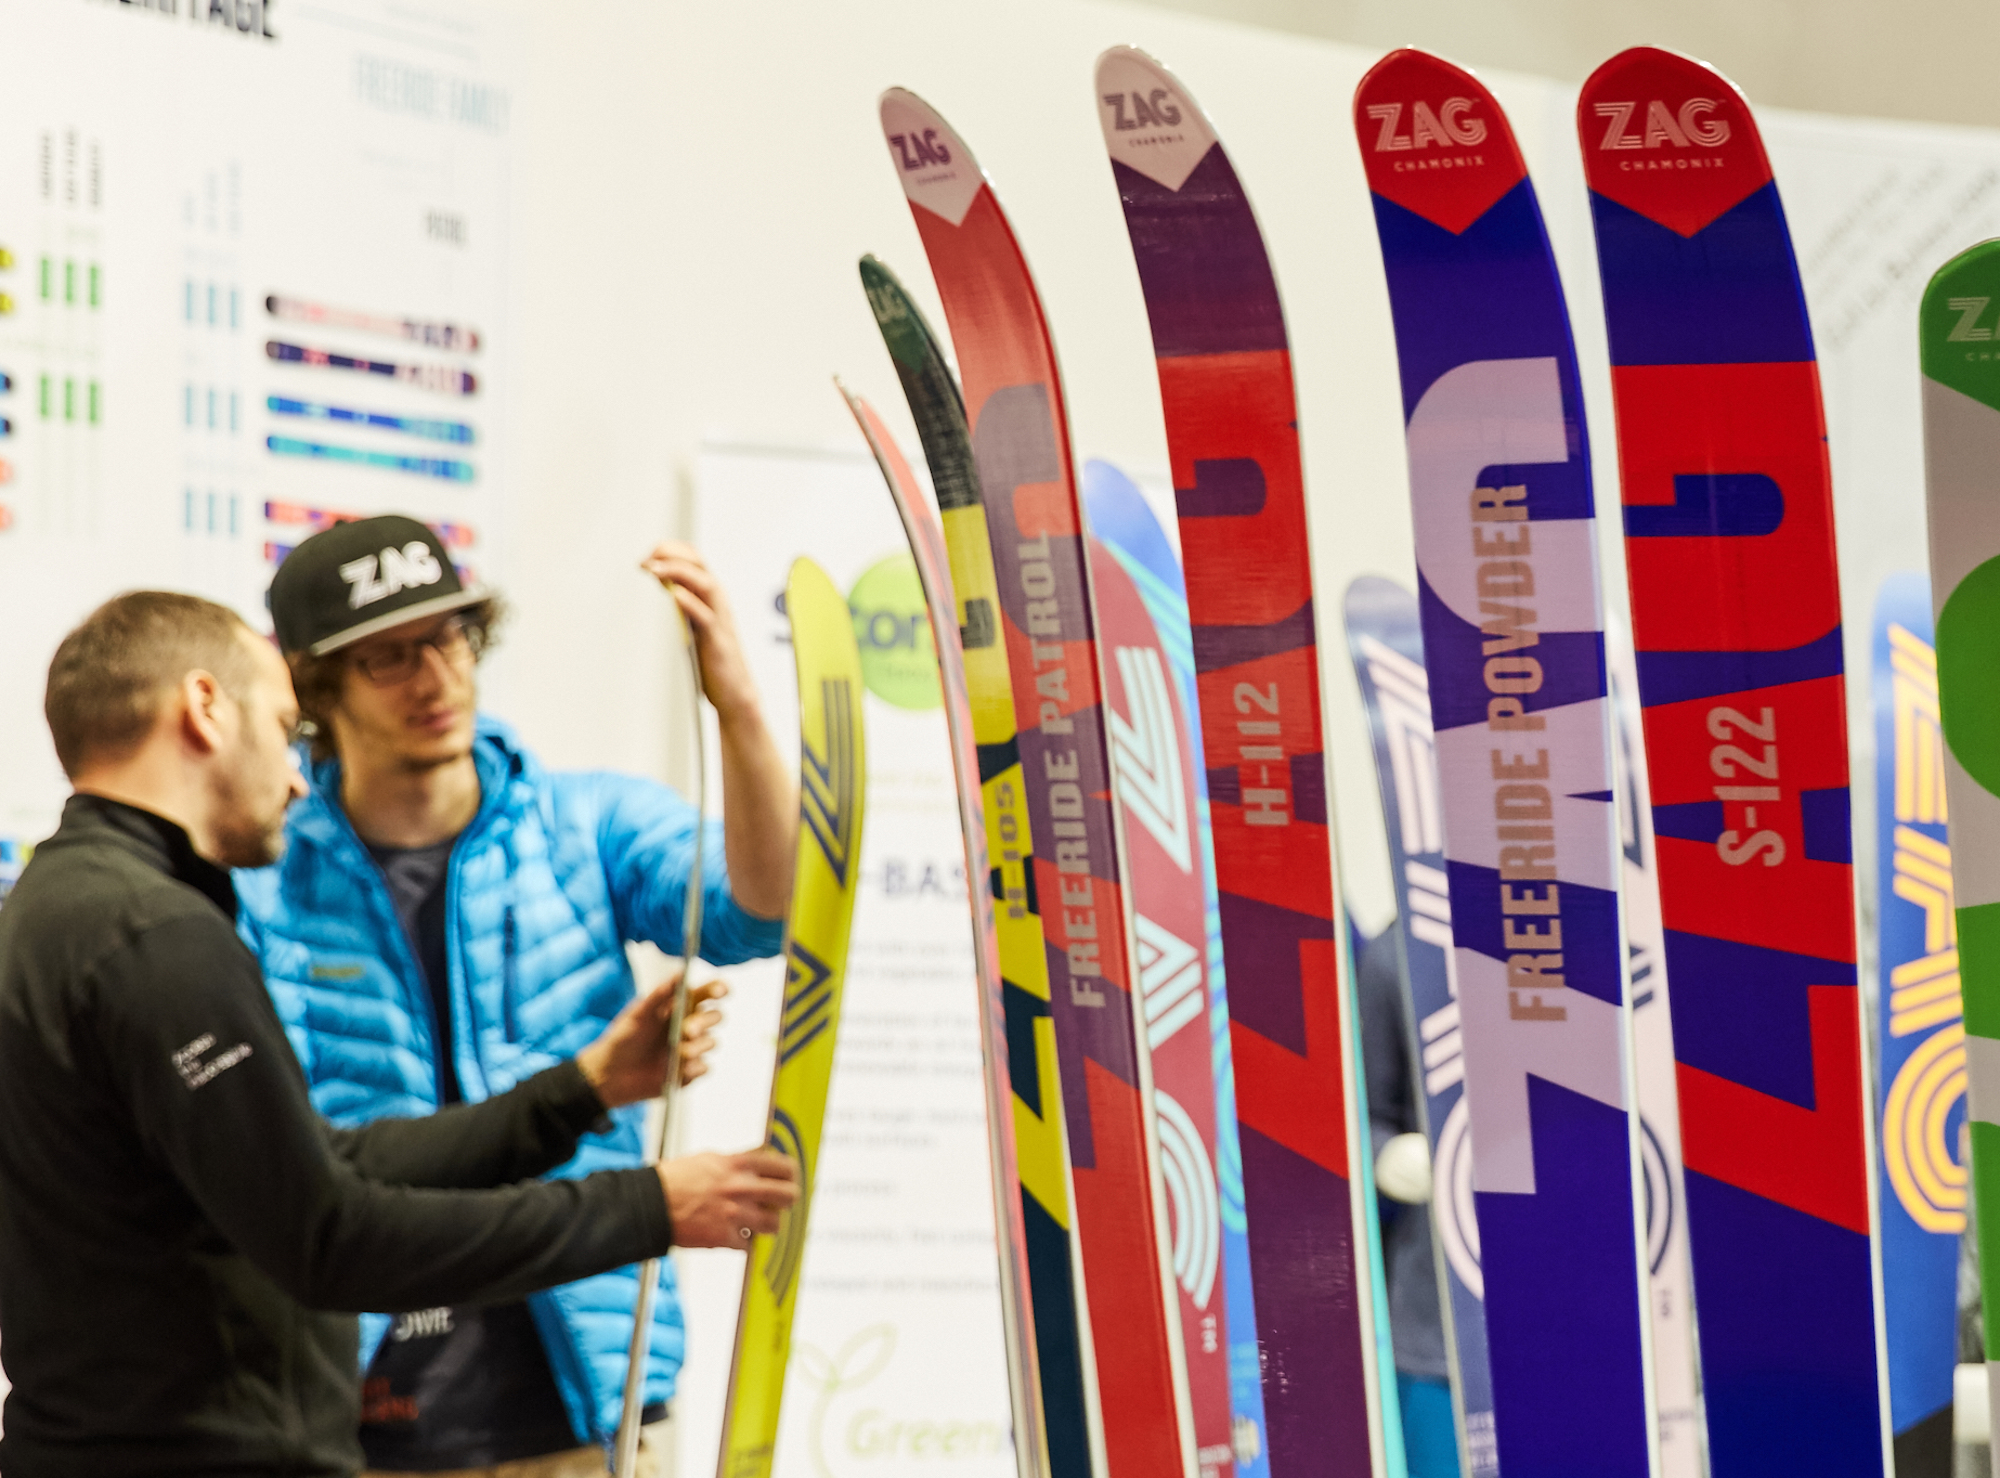 Snowsports At Ispo Munich A Whole World Of Winter Sports with regard to Ski And Snowboard Show Exhibitor List